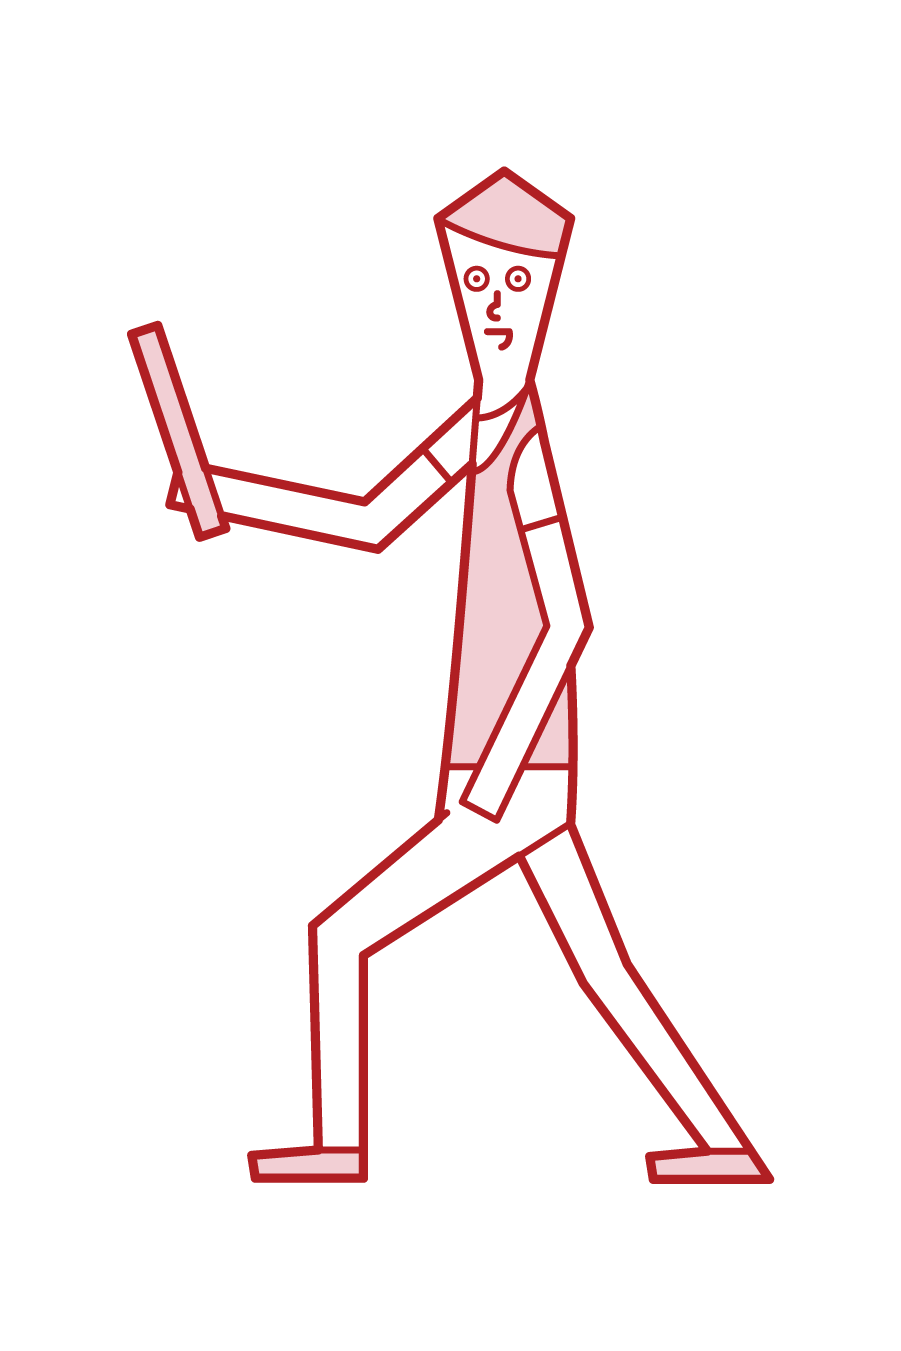 Illustration of a man throwing a rod